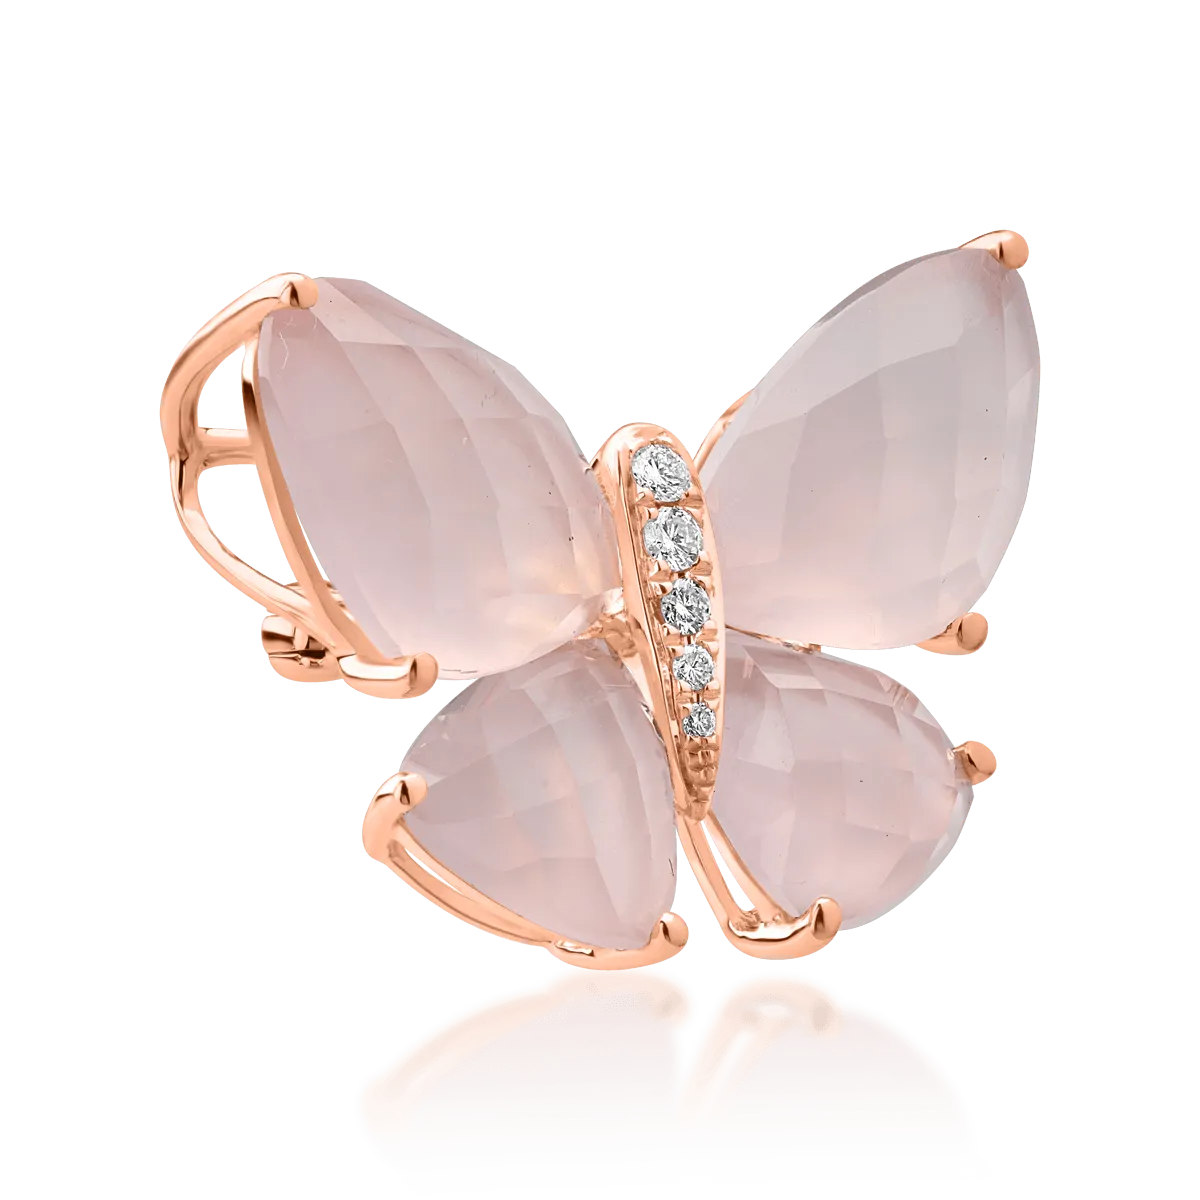 18K rose gold brooch with 11.5ct rose quartz and 0.06ct diamonds